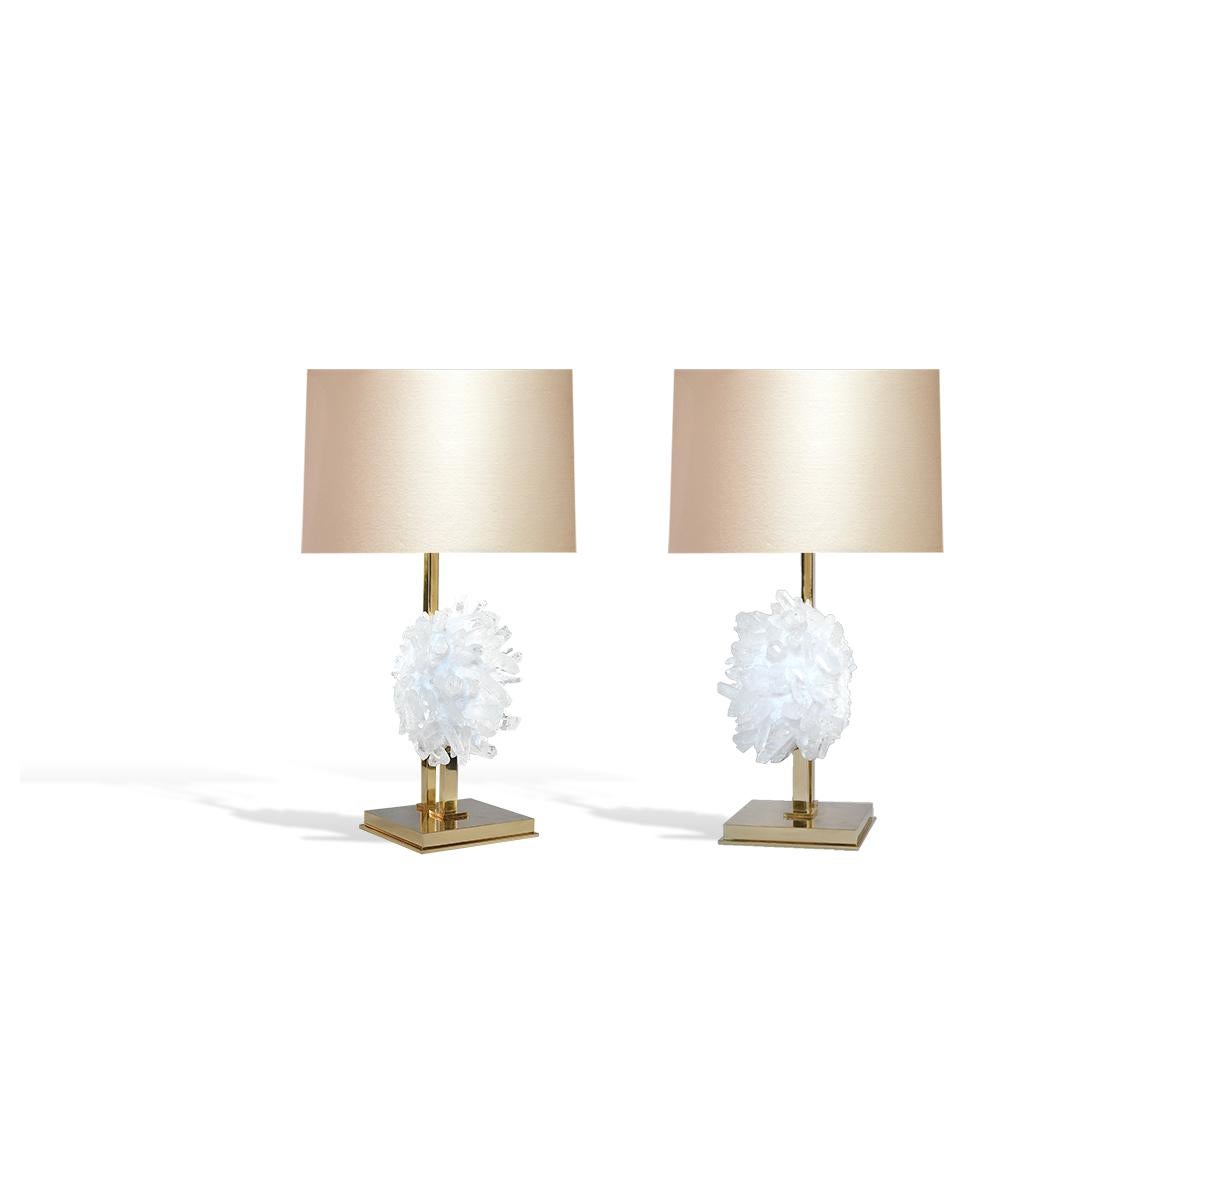 Pair of rock crystal clusters mount as lamps. Polish brass stand.
Created by Phoenix.
To the top of the rock crystal part: 13 in H
each lamp installed two standard sockets
lampshade not included.